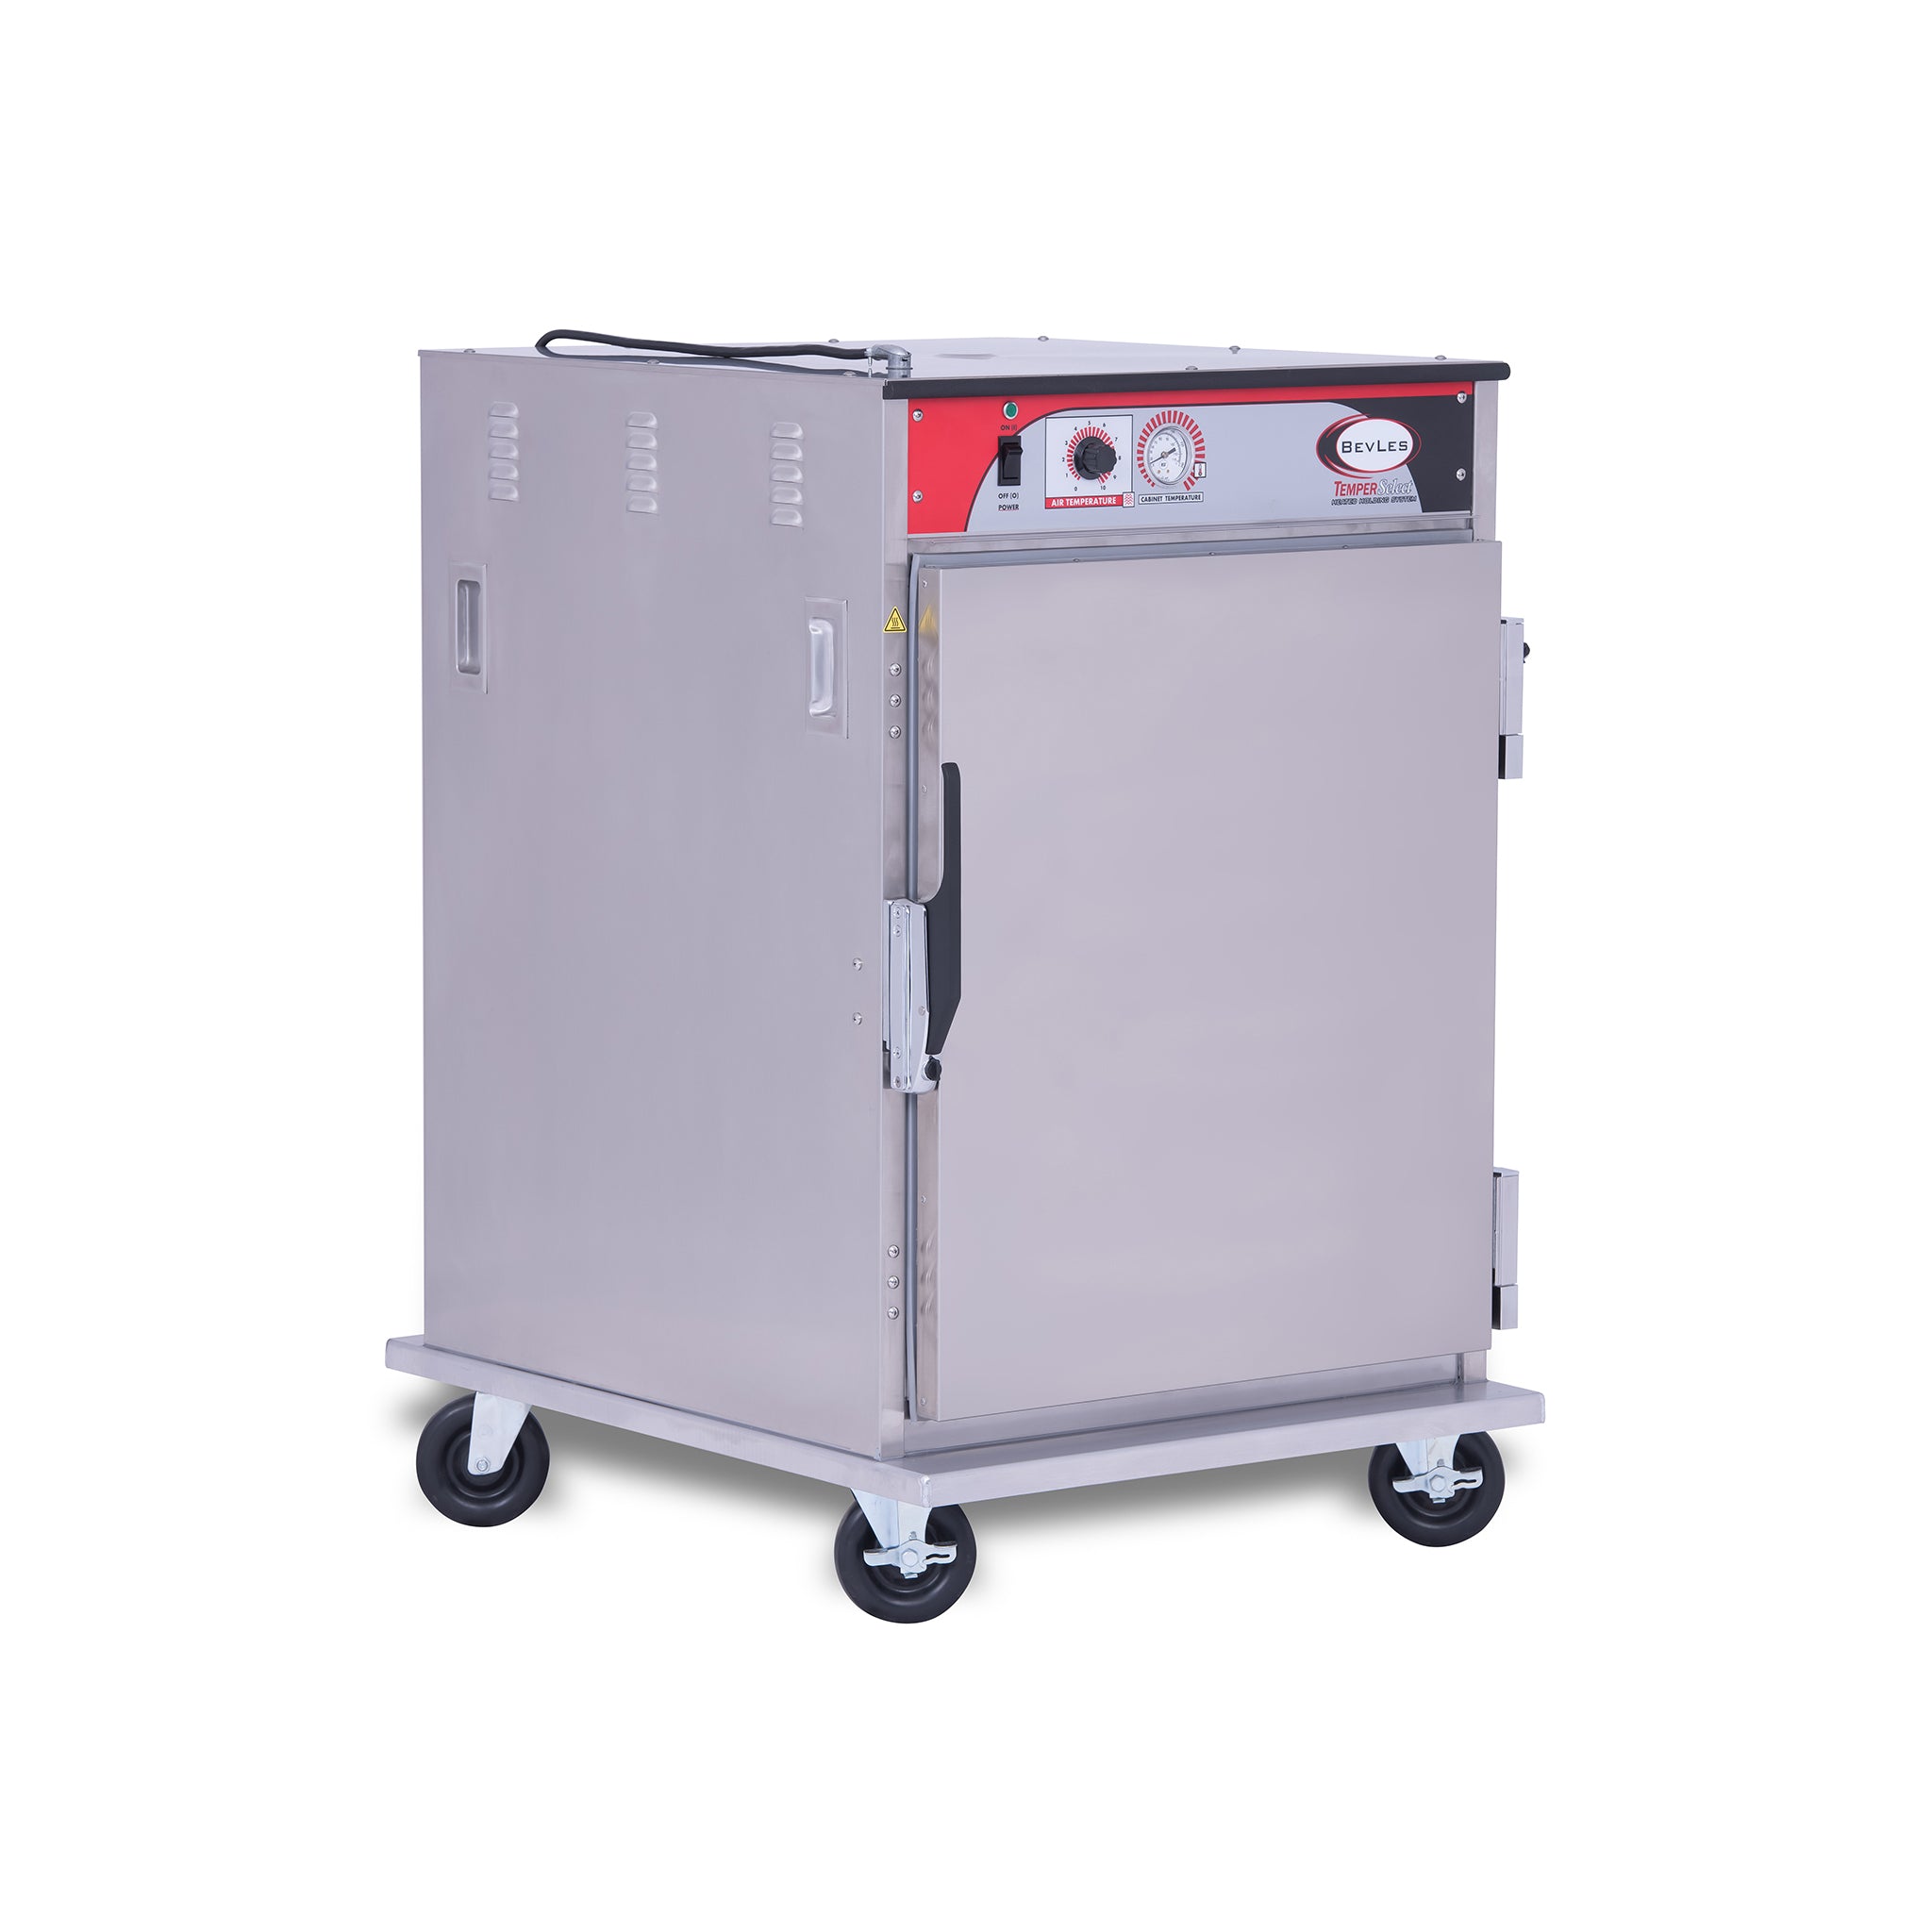 BevLes - HTSS44P81, BevLes Temper Select 1/2 Size Heated Holding Cabinet, Narrow Width, 115V, in Silver